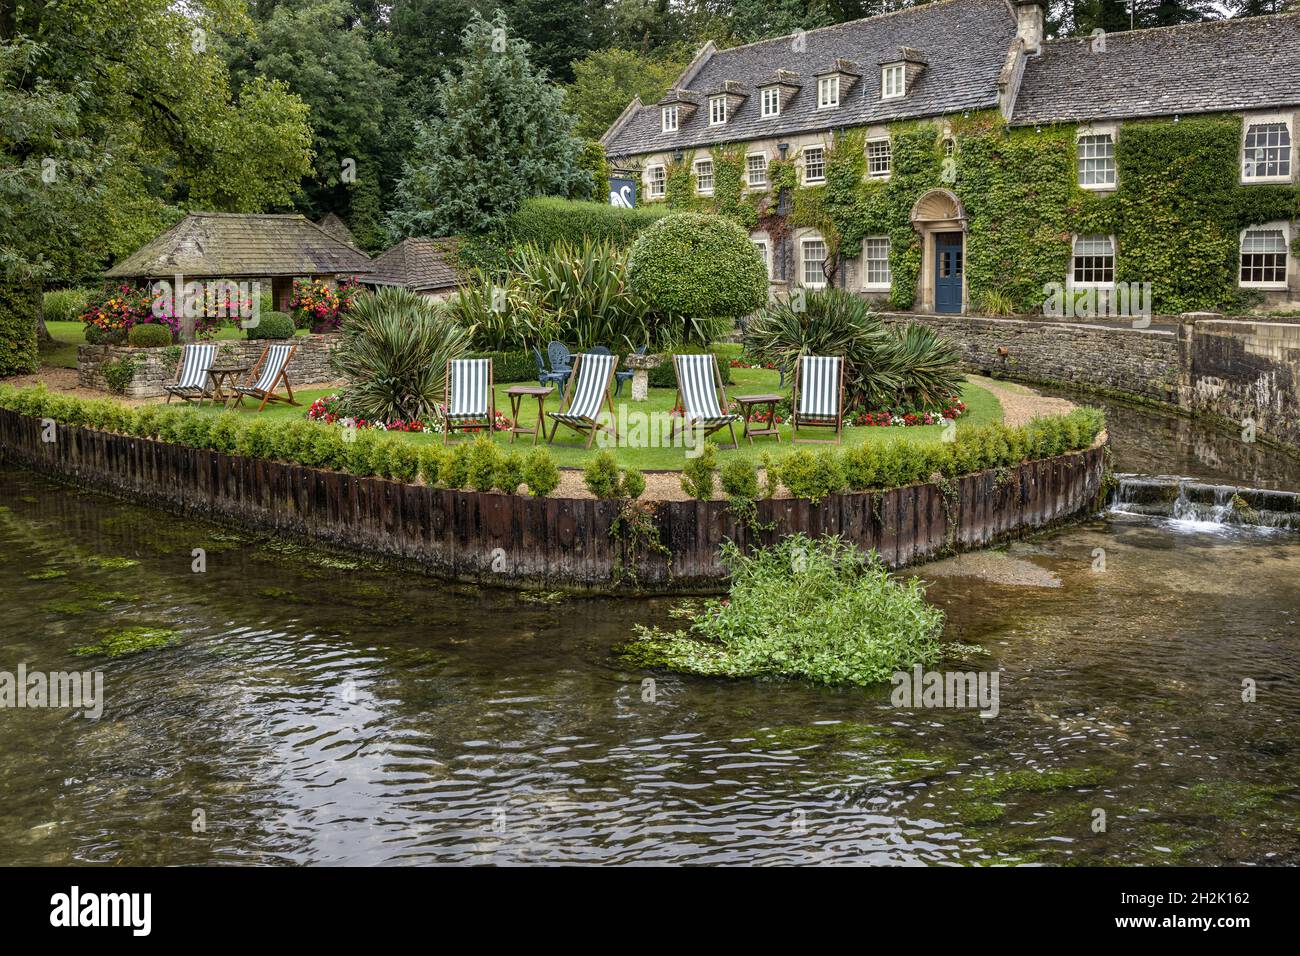 The pretty landscaped garden of the ivy covered Swan Hotel in the picturesque village of Bibury in the Gloucestershire Cotswolds, England. Stock Photo